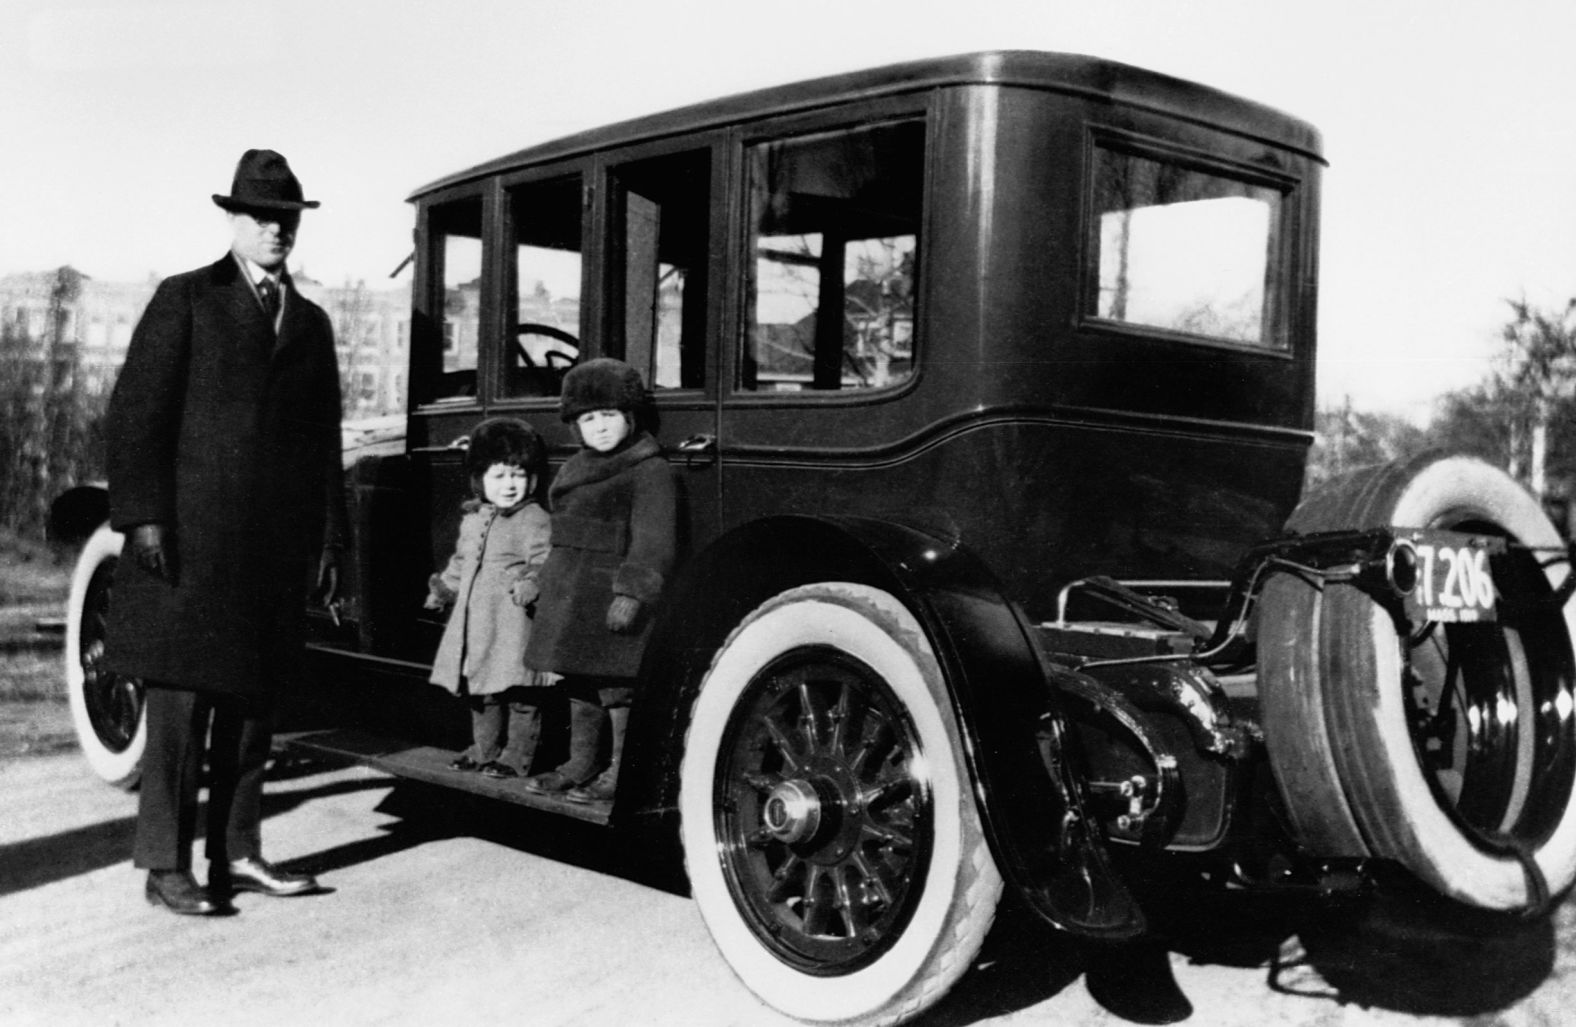 John F. Kennedy, center, poses with his older brother, Joseph P. Kennedy Jr., and his father, Joseph P. Kennedy Sr., in Brookline, Massachusetts, in 1919.